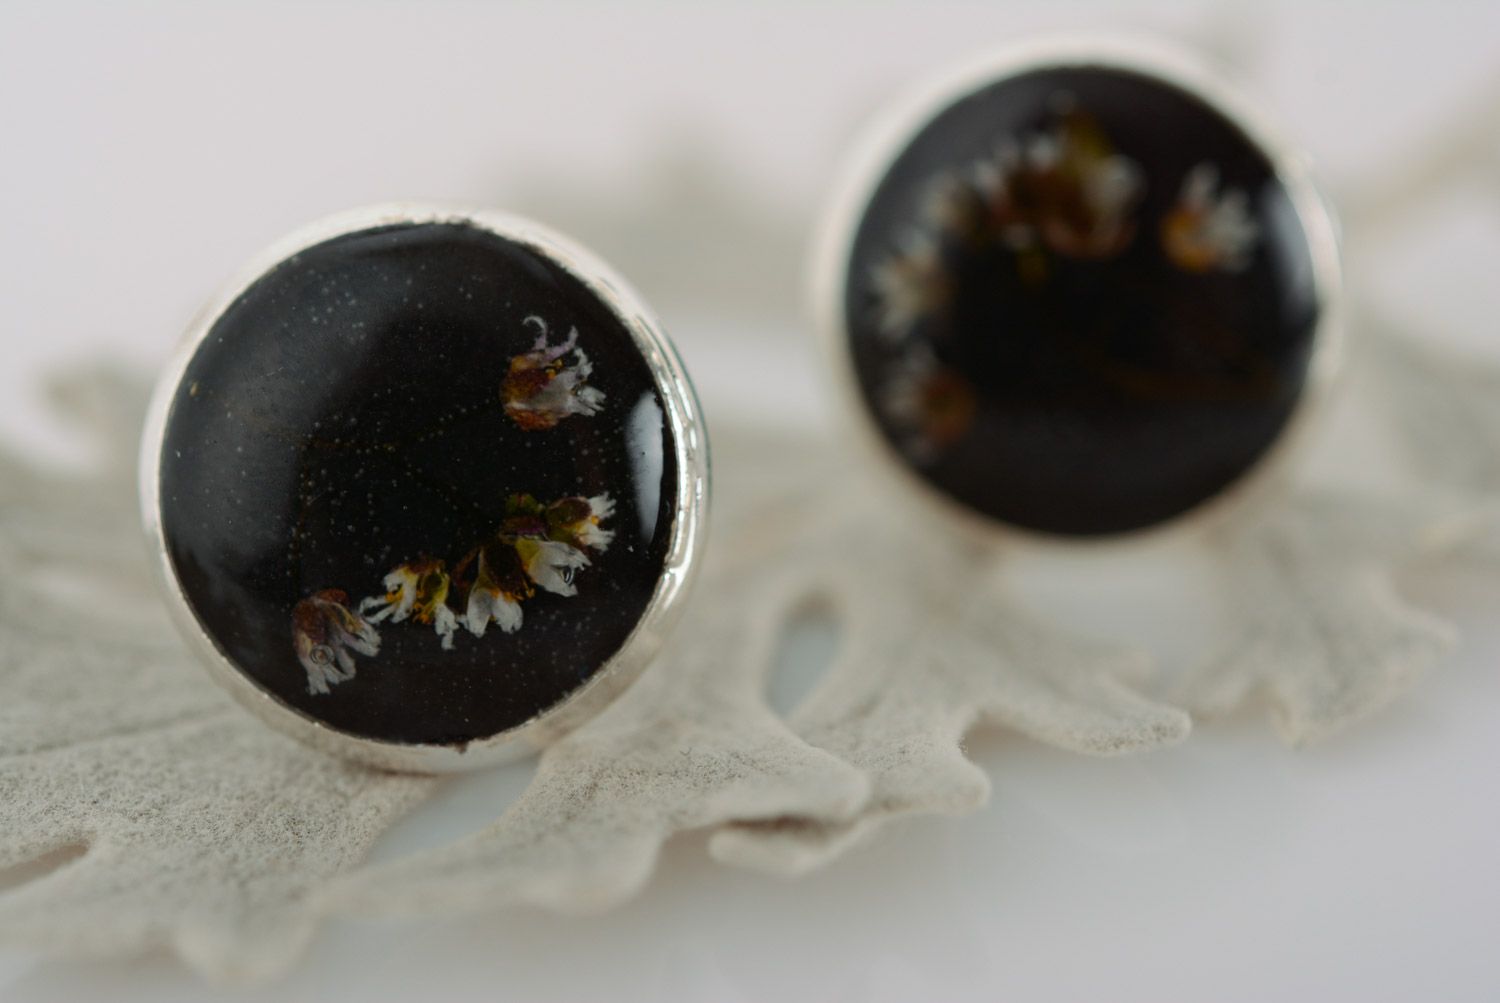 Homemade small black stud earrings with dried flower embedded in epoxy resin photo 1